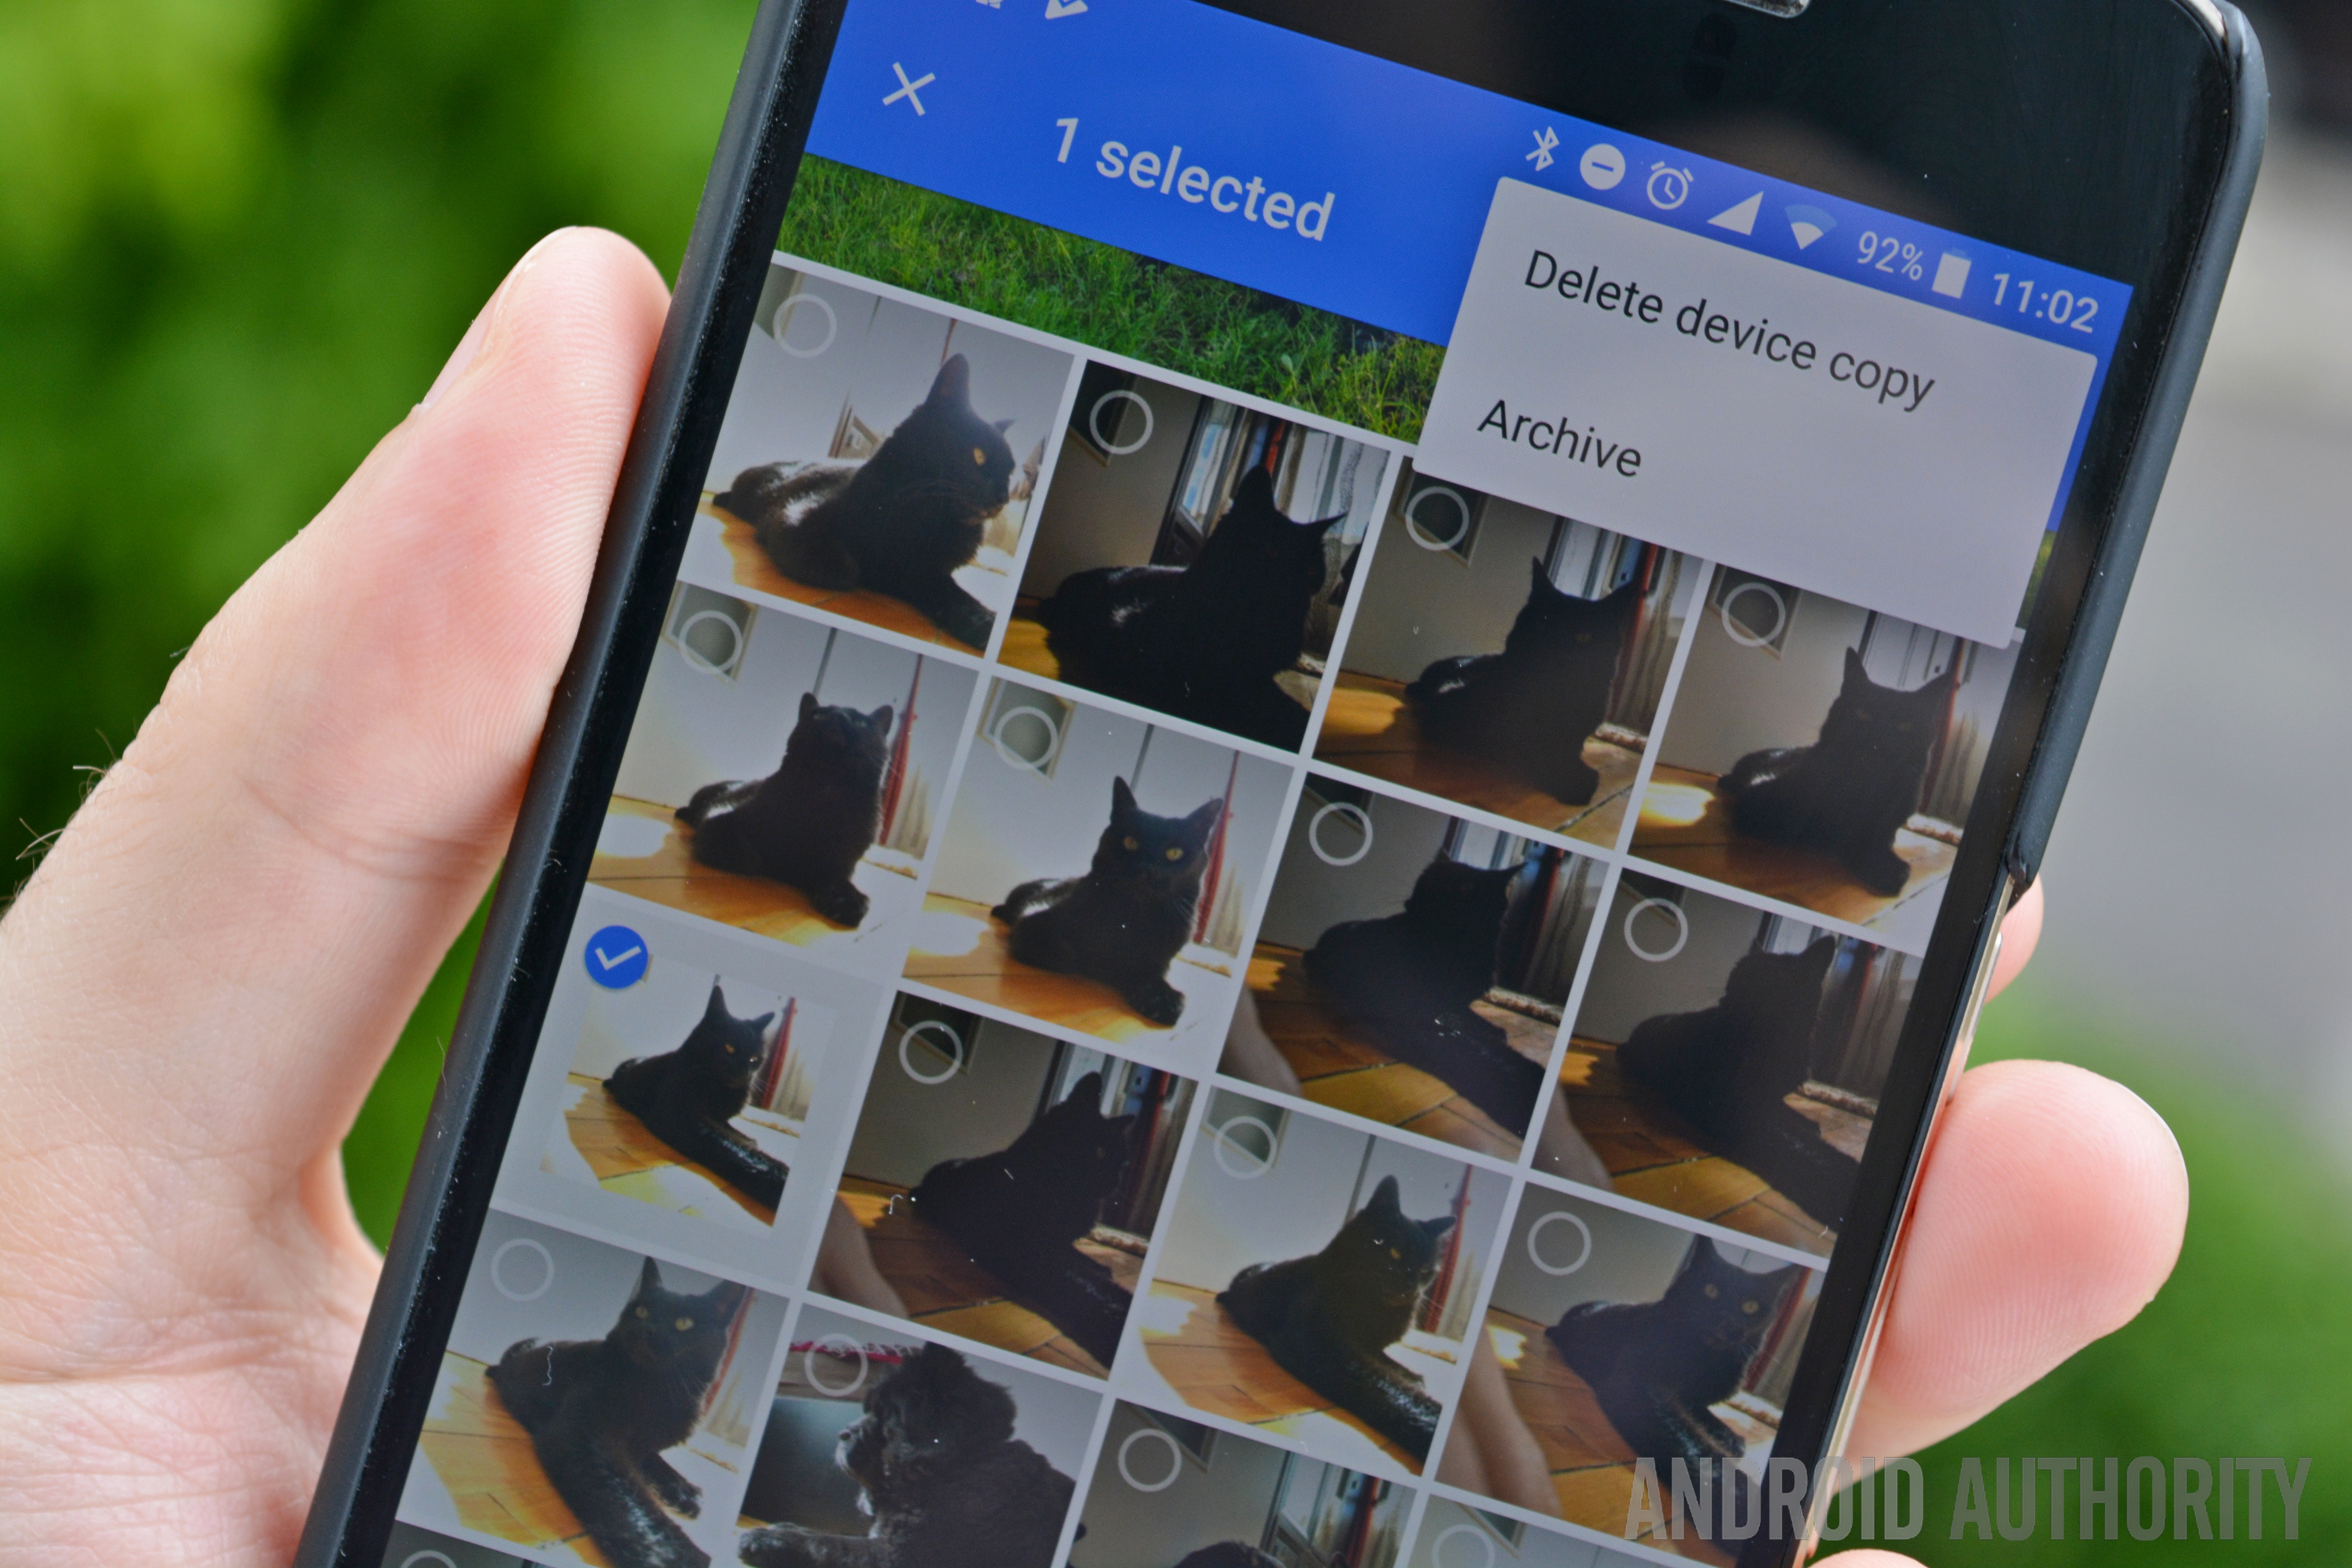 Google Photos now makes funny cat and dog videos - Android Authority